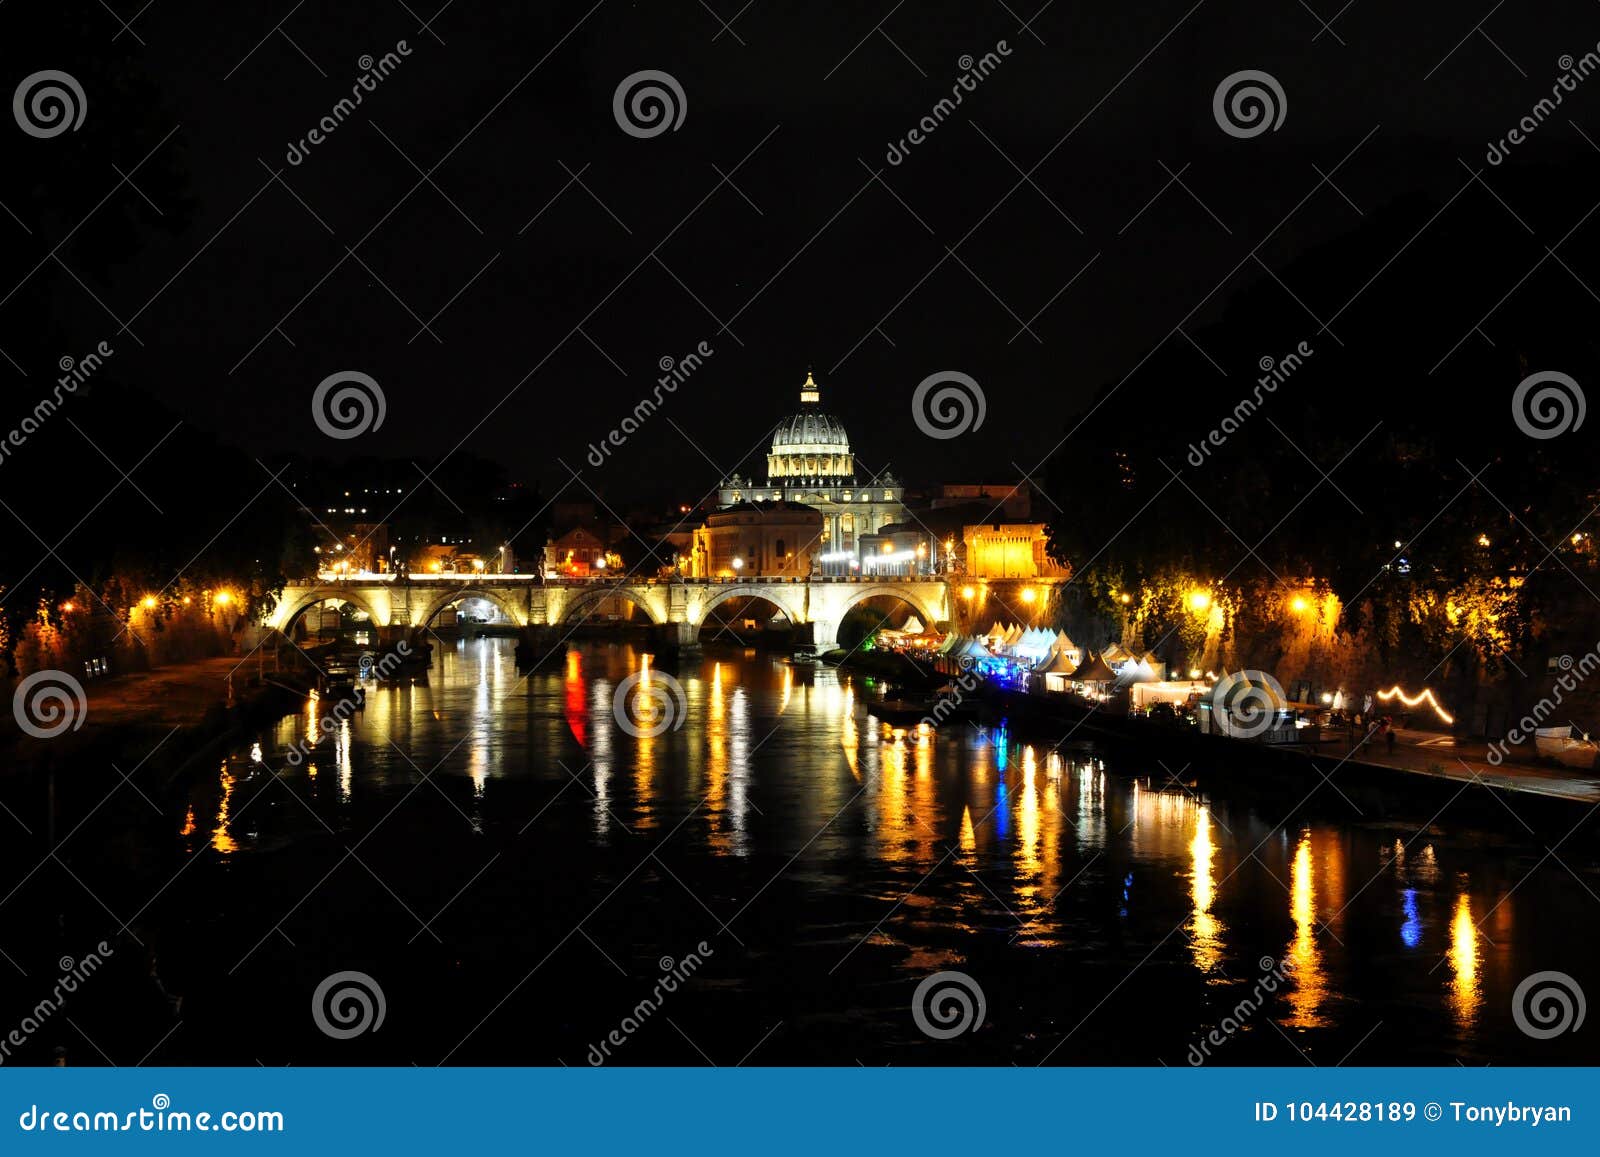 view of the bridge vittorio emanuele ii and the dome of the basilica of saint peter